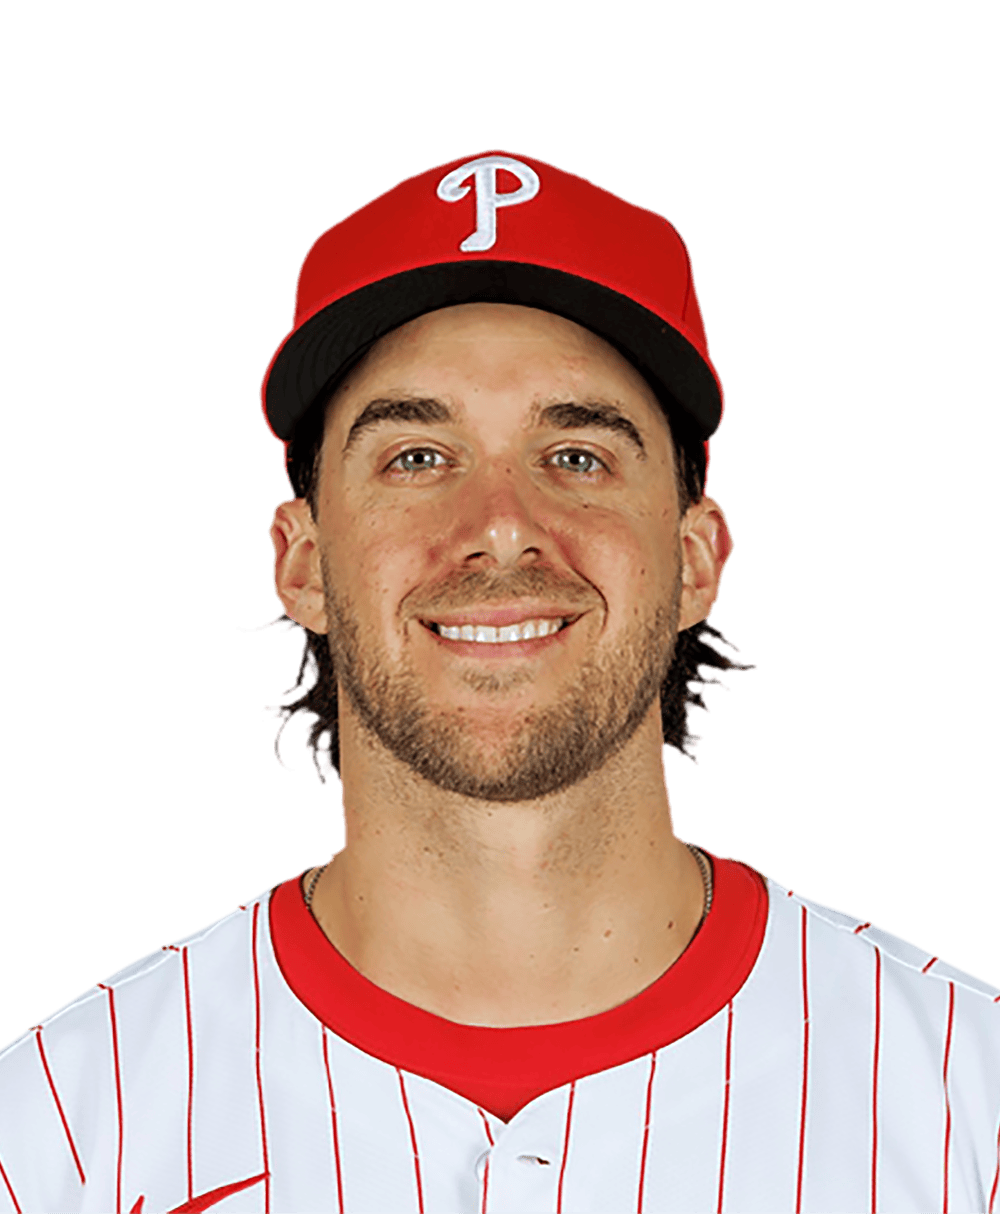 Phillies turn to upcoming free agent Aaron Nola to pitch past